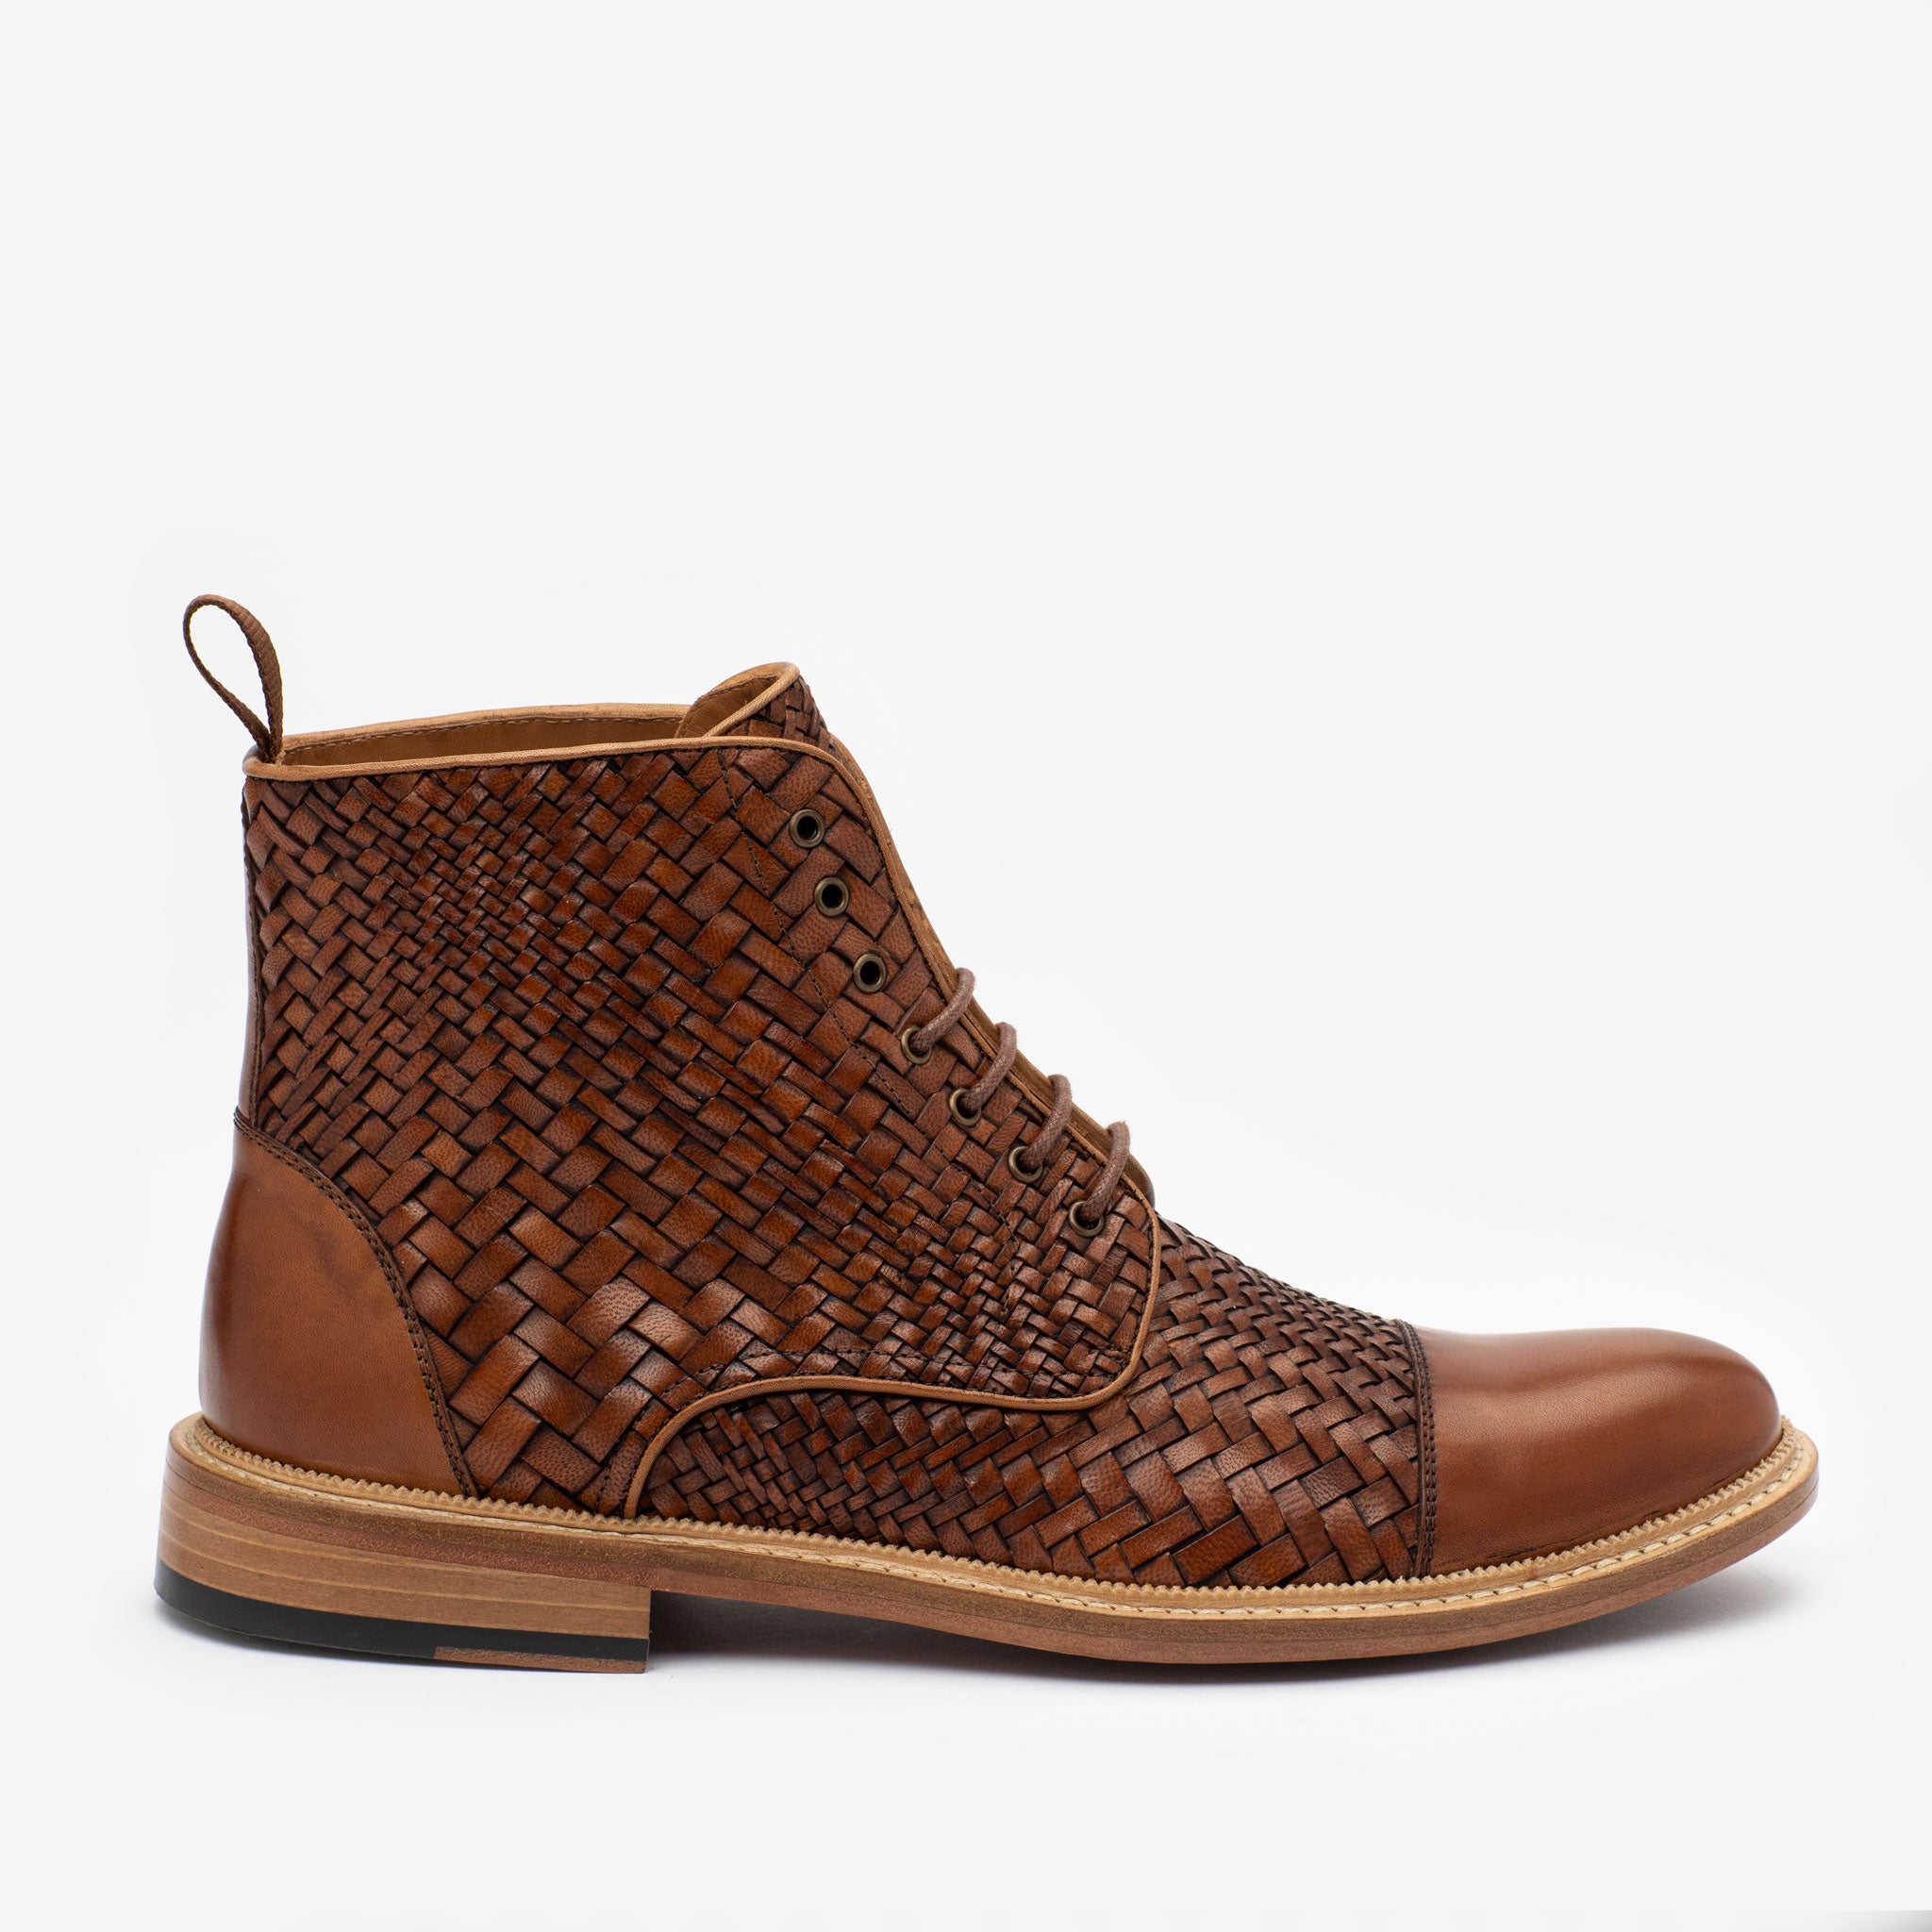 The Rome Boot in Woven